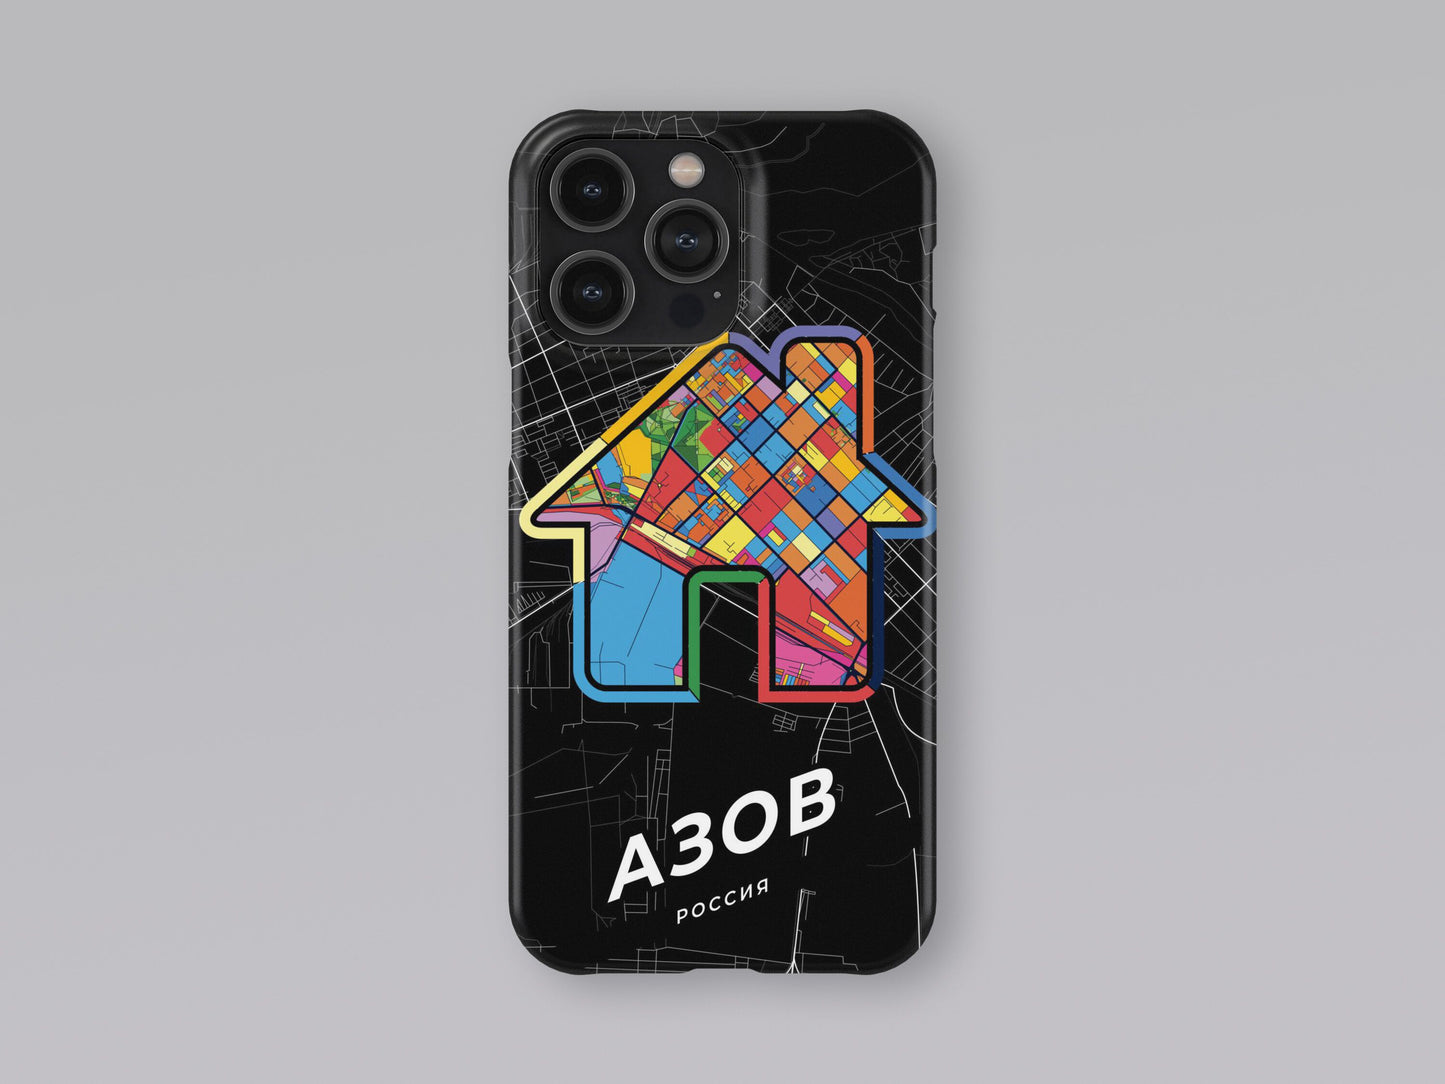 Azov Russia slim phone case with colorful icon. Birthday, wedding or housewarming gift. Couple match cases. 3